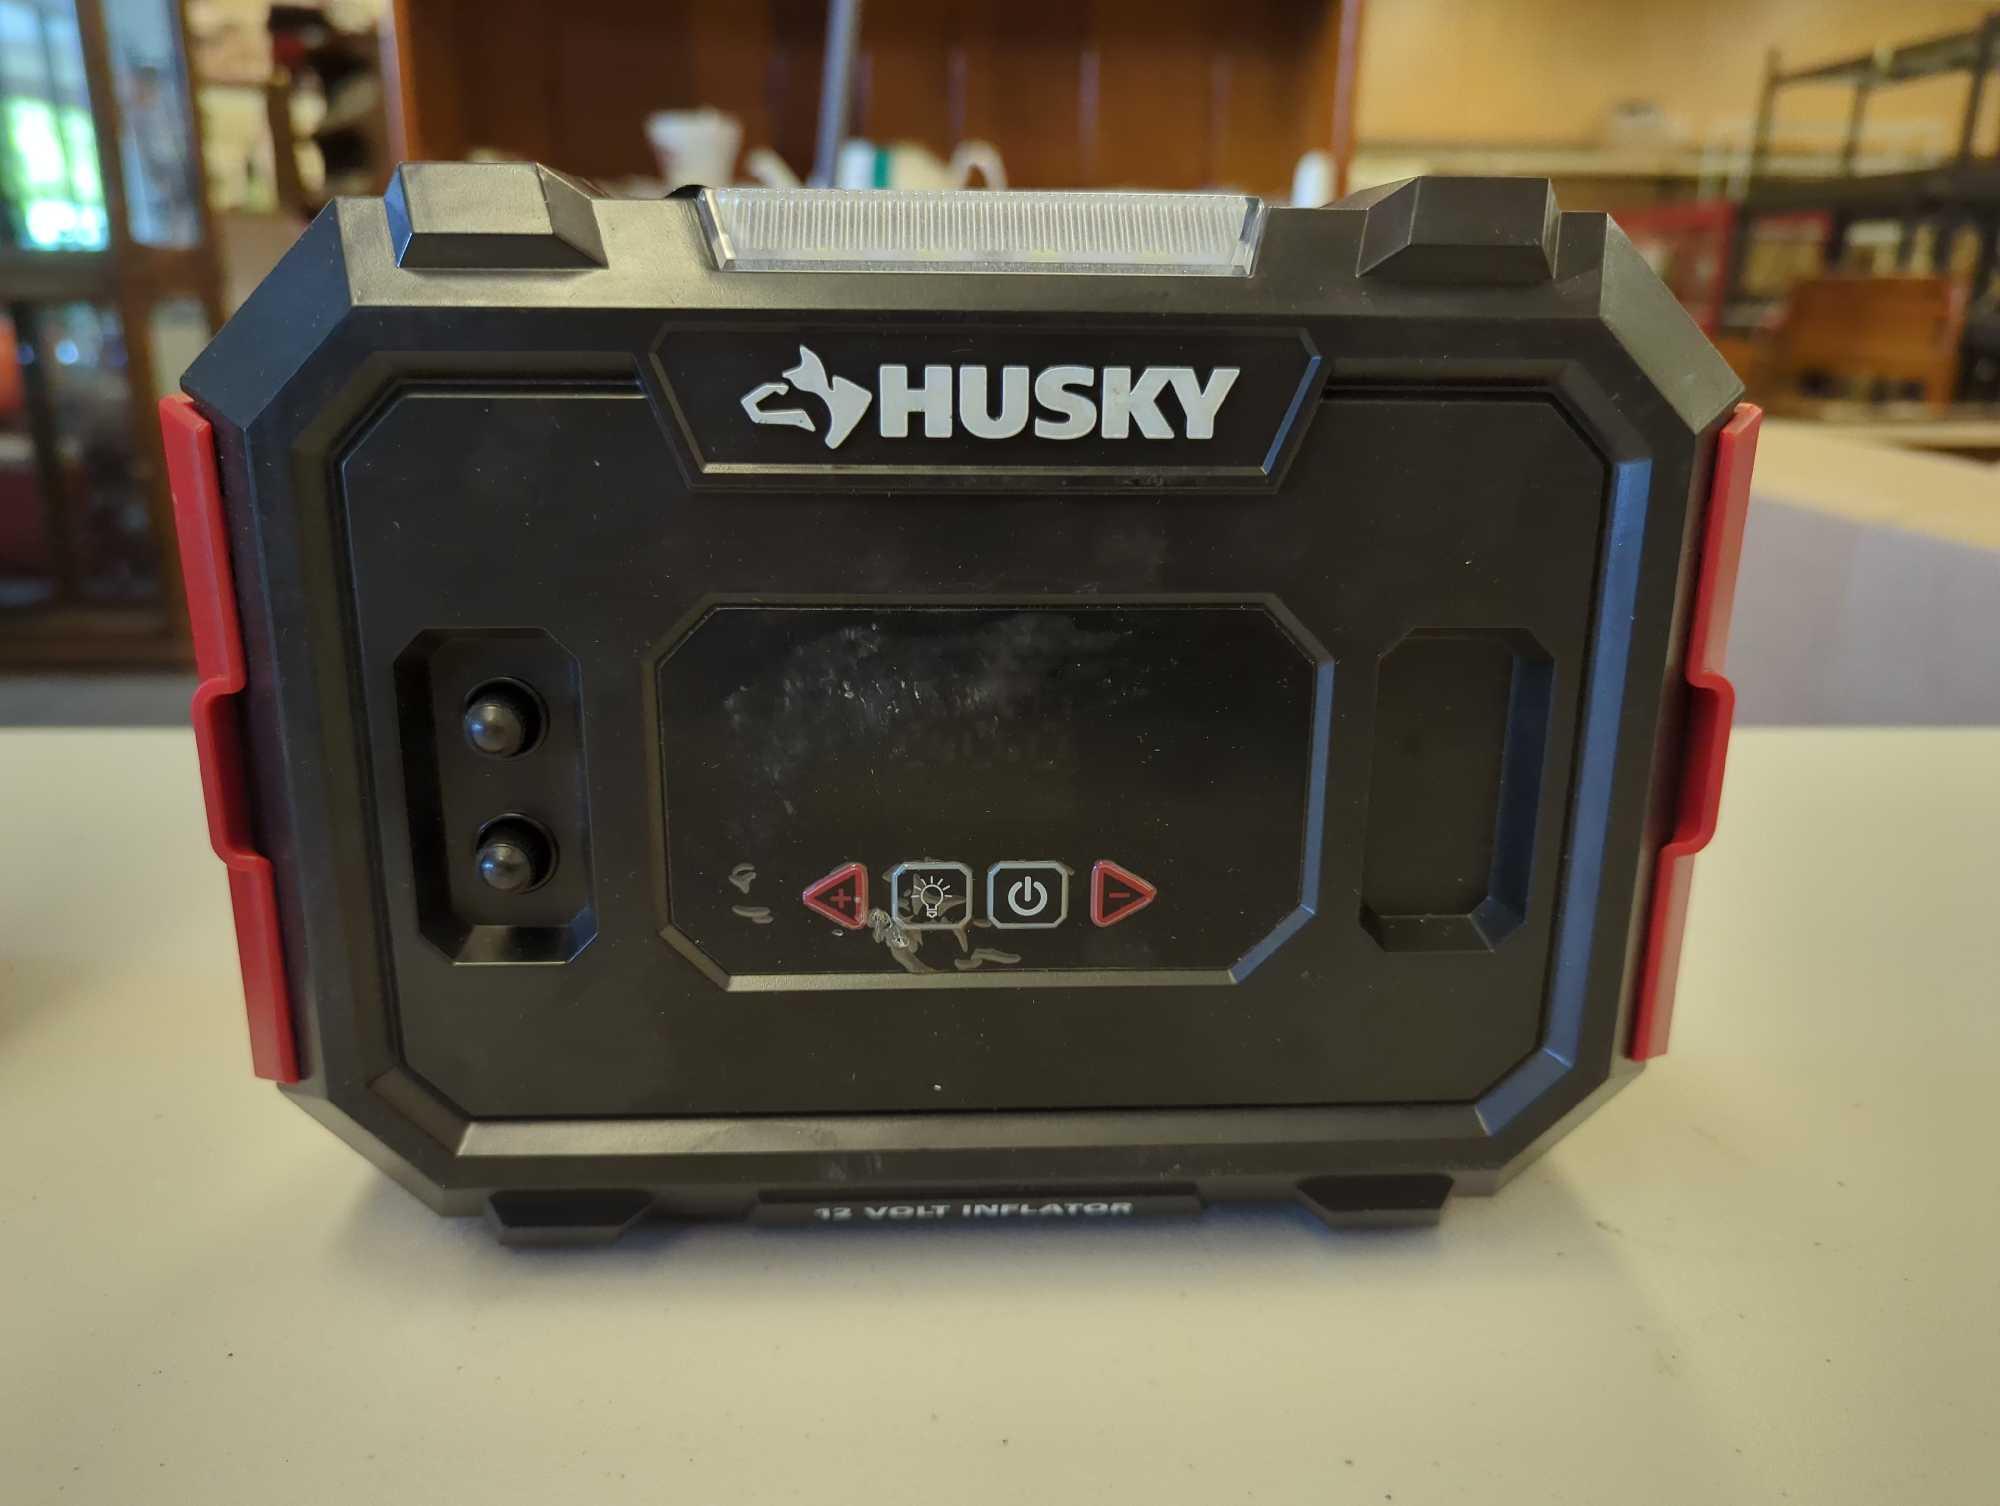 Husky 120-Volt Inflator. Comes as is shown in photos. Appears to be used. SKU # 1009544671 Retails